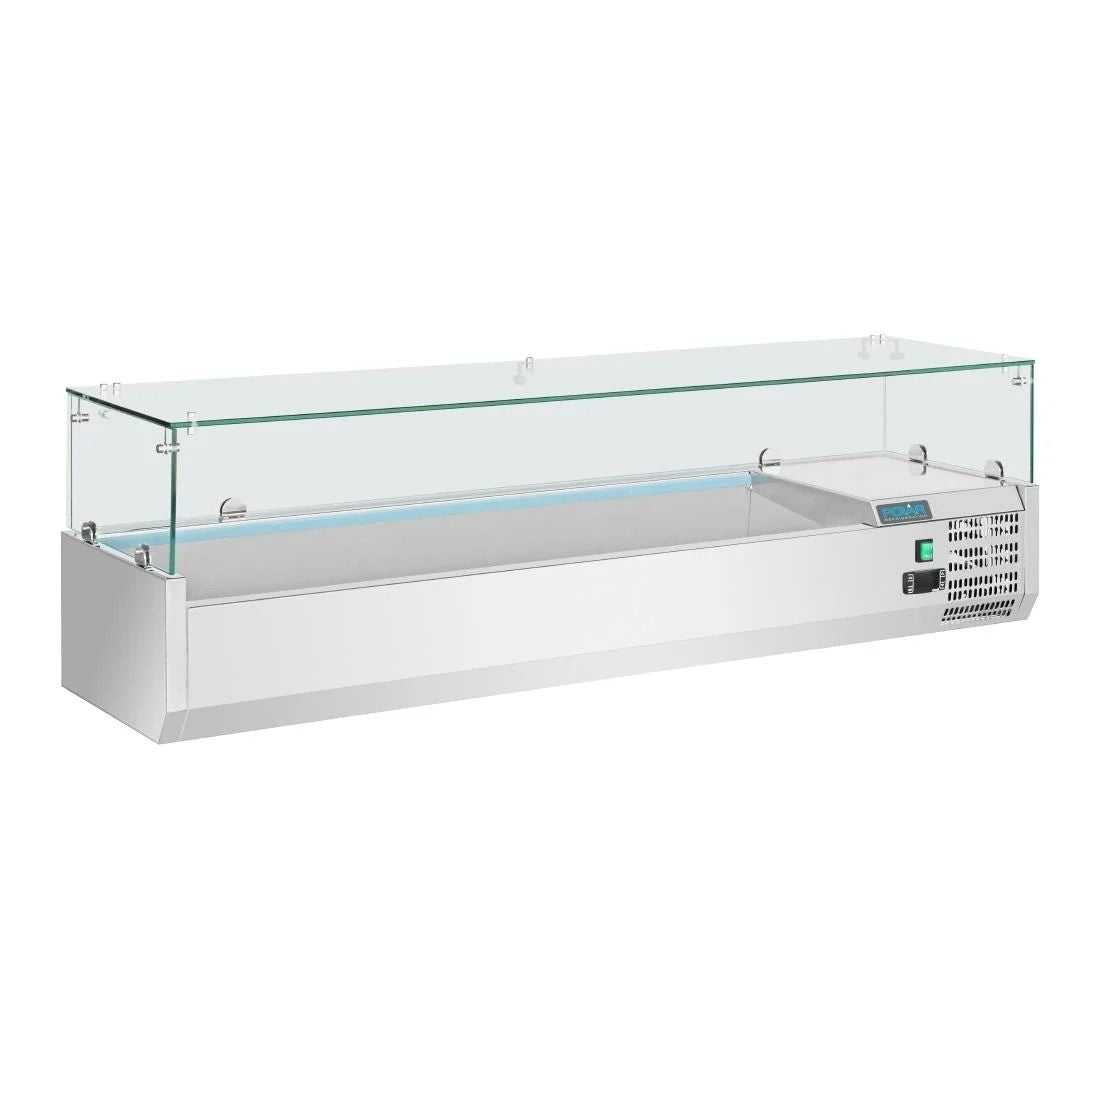 Polar Refrigerated Servery Topper 6 GN - GD876 VRX Topping Units Polar   